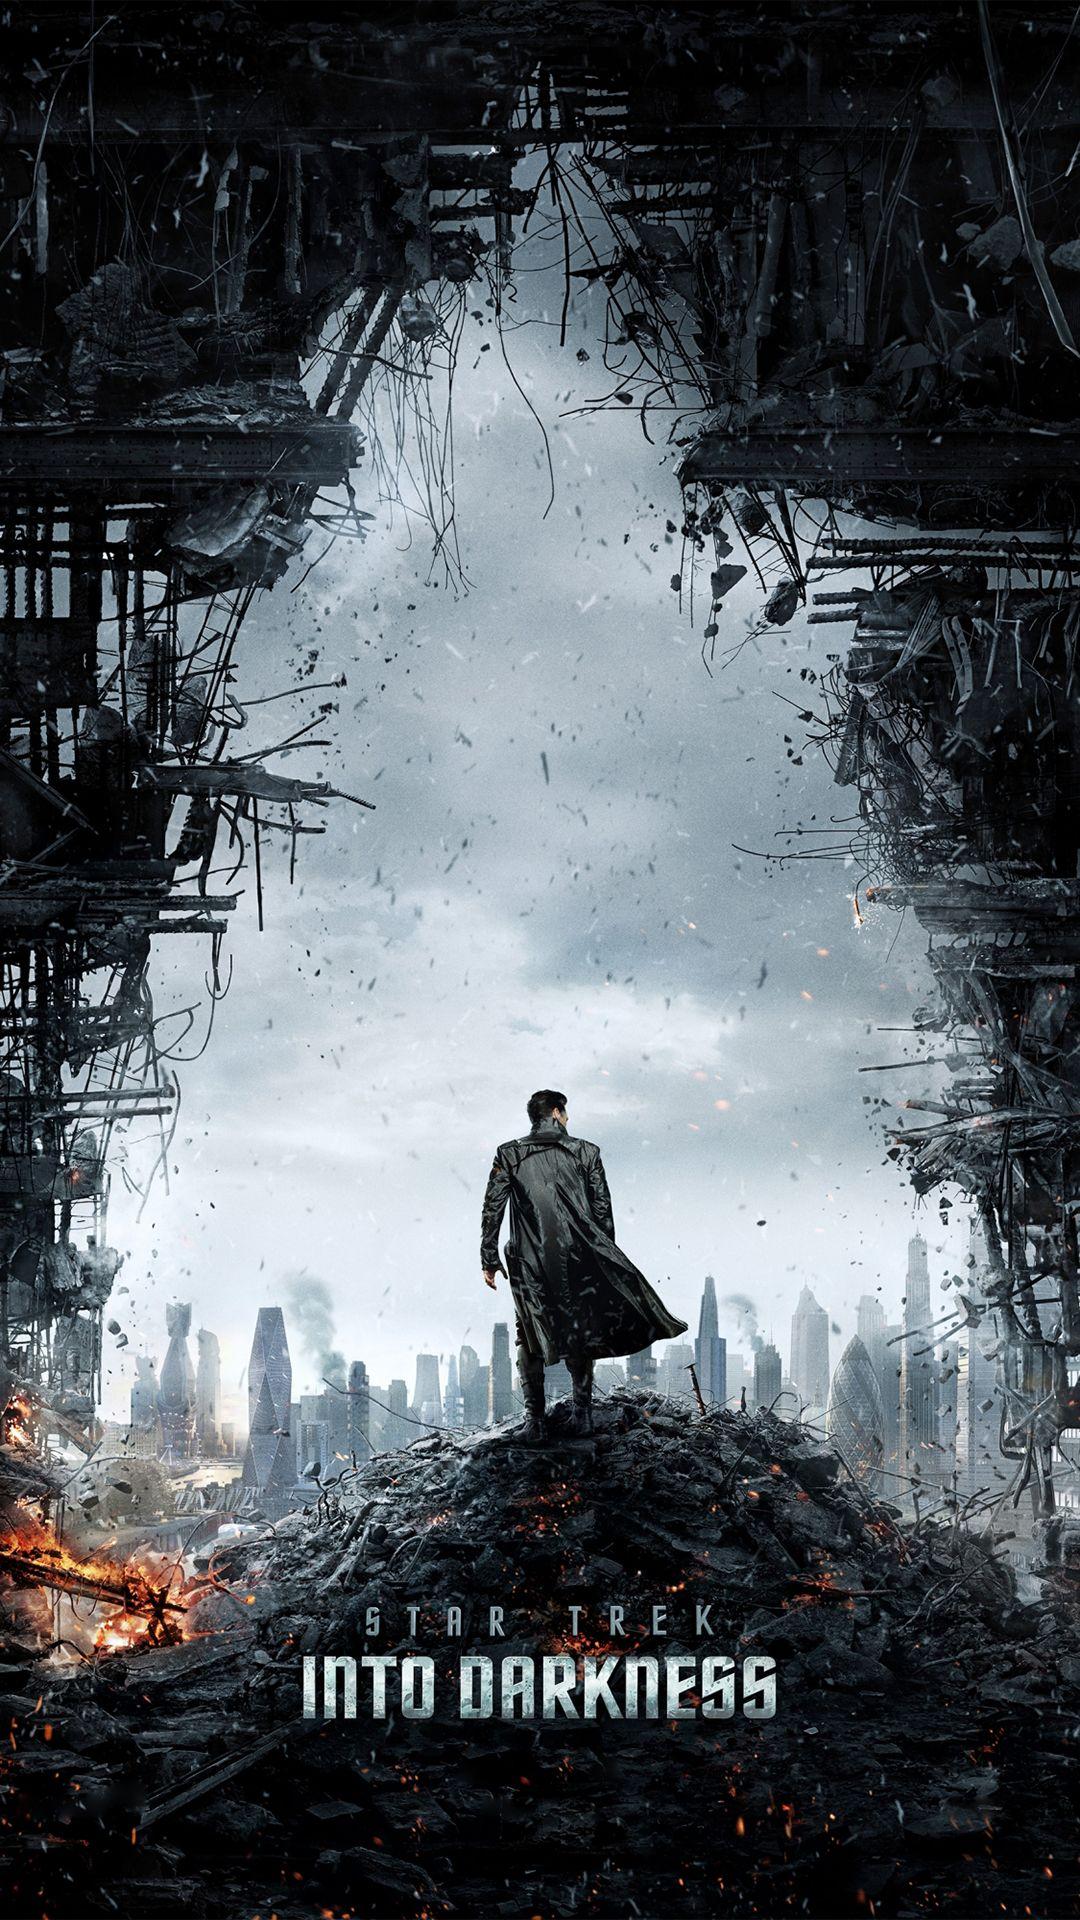 Star Trek Into darkness htc one wallpaper, free and easy to